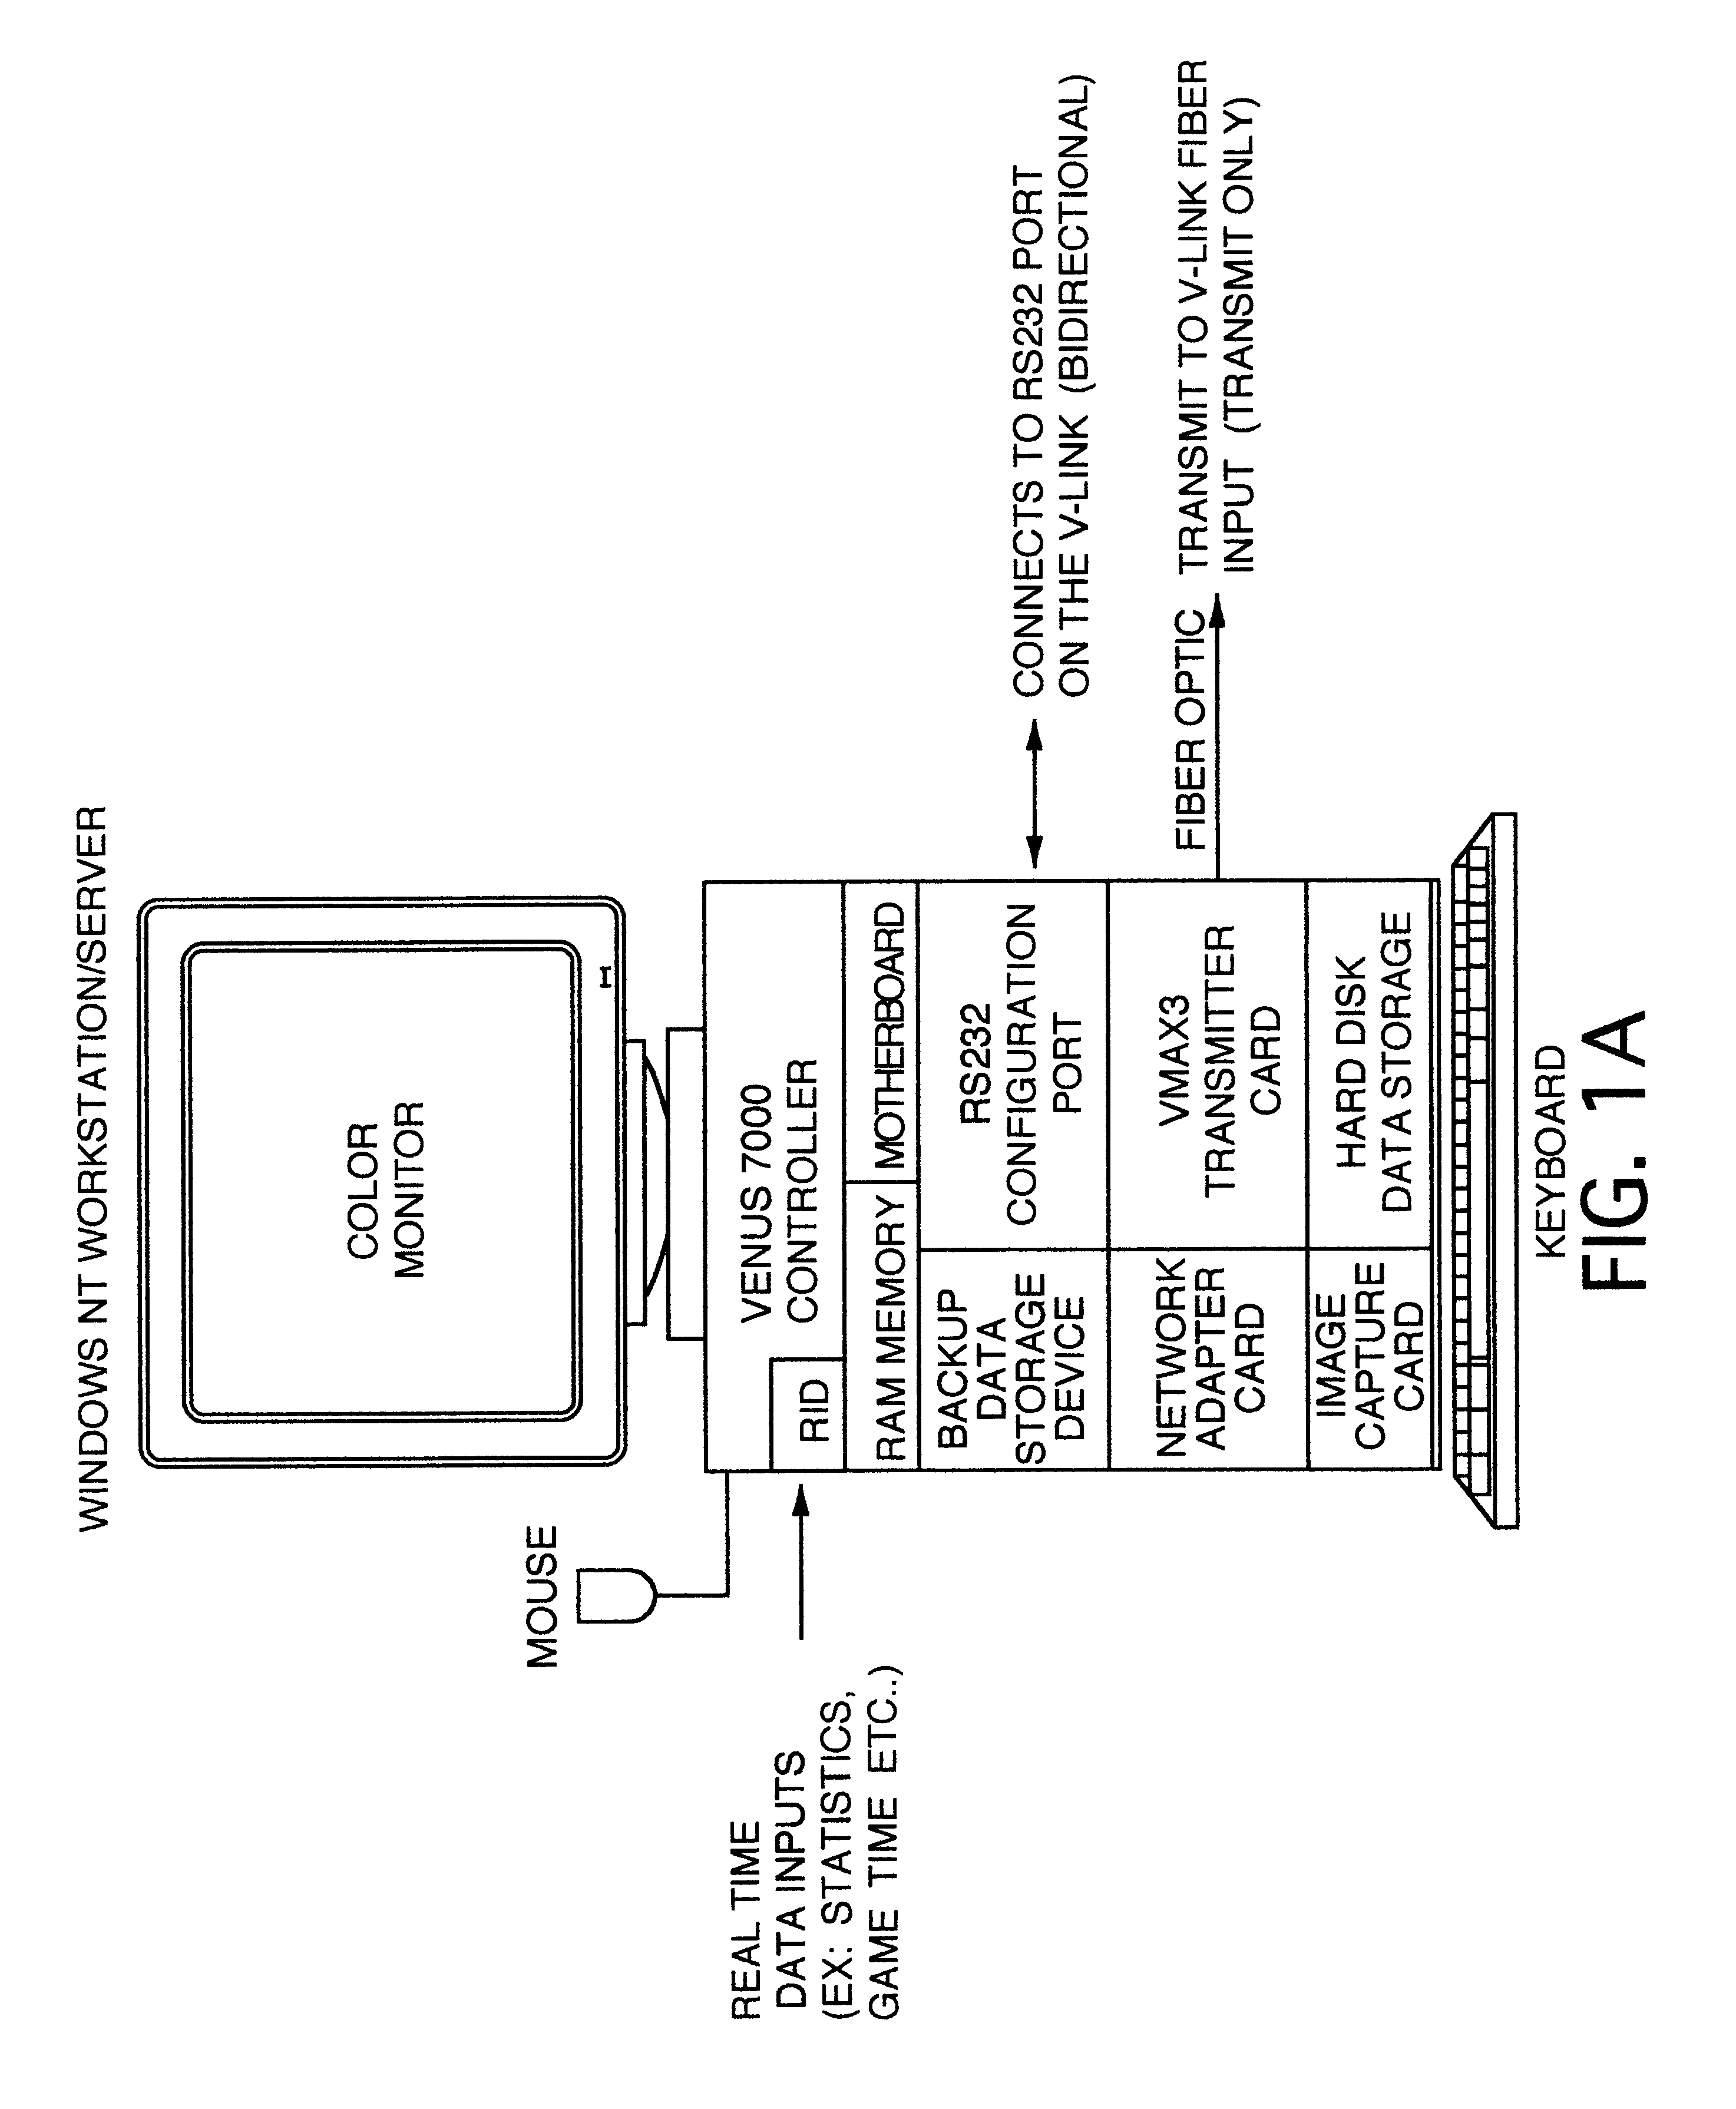 Control system for an electronic sign (video display system)